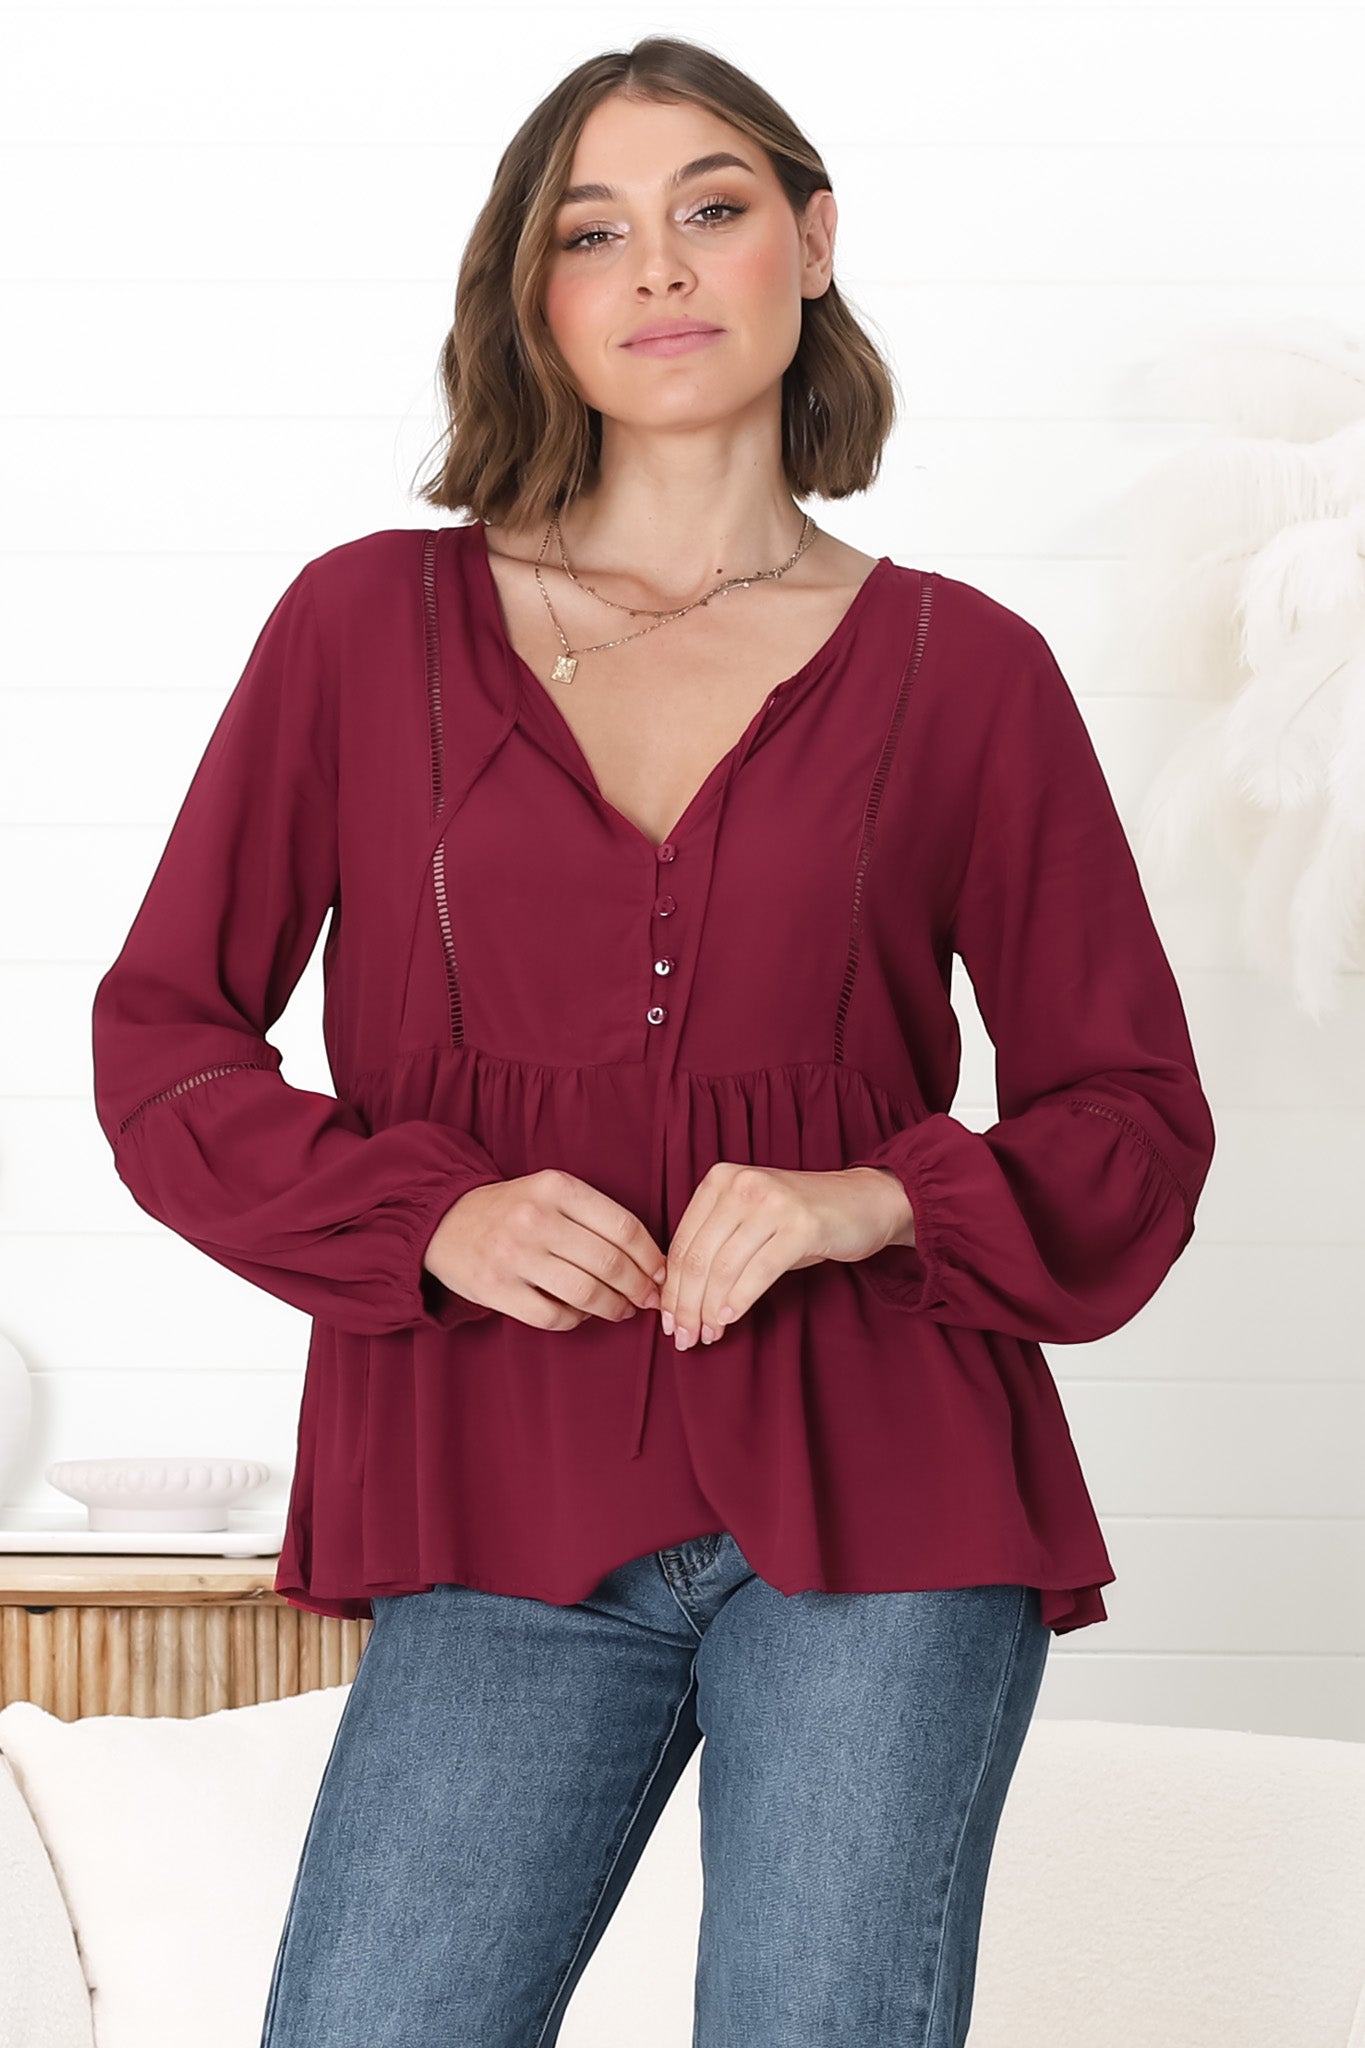 Alexia Top - V Neck Smock Top with Crochet Insert Details in Wine